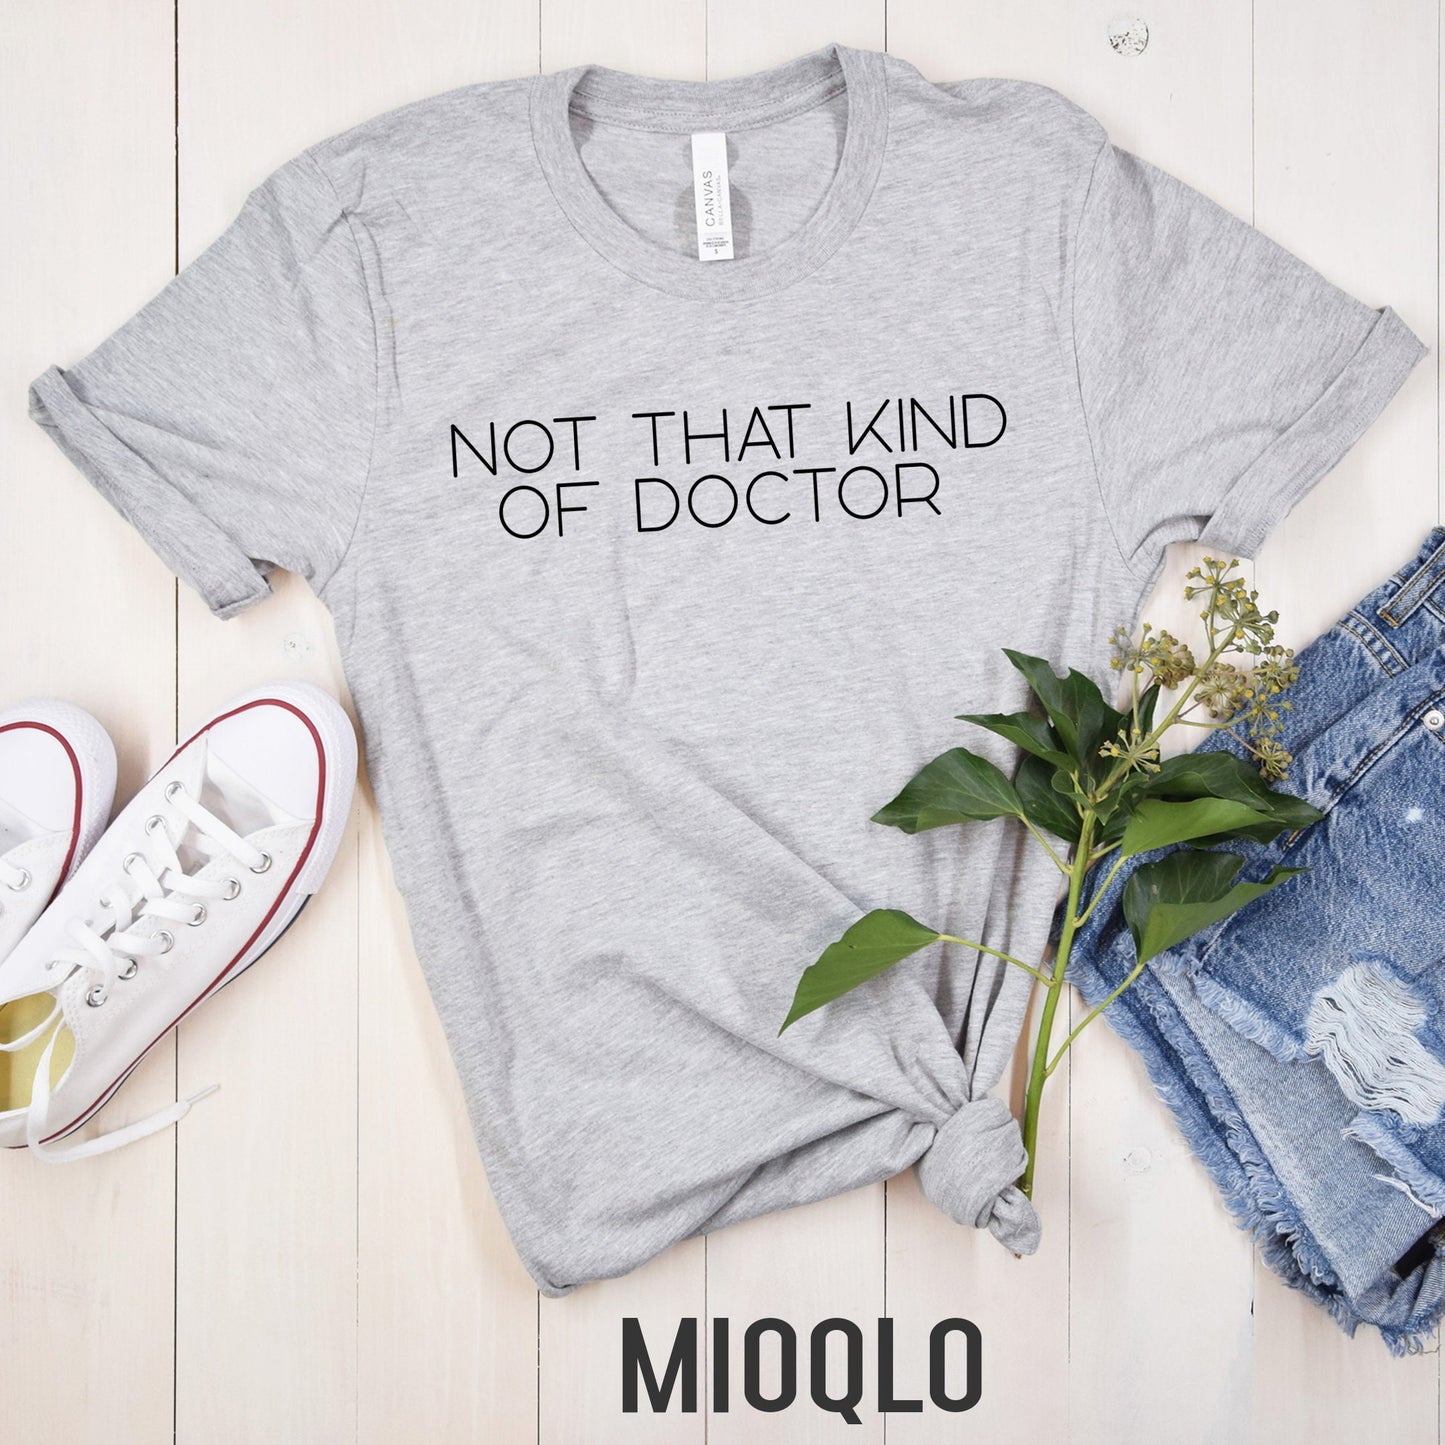 PHD Graduation Gift, Not That Kind Of Doctor, Phd Shirt, Phinished, Dissertation, Phd Gift, Doctorate Gift, Doctor Graduation Gift, Graduate